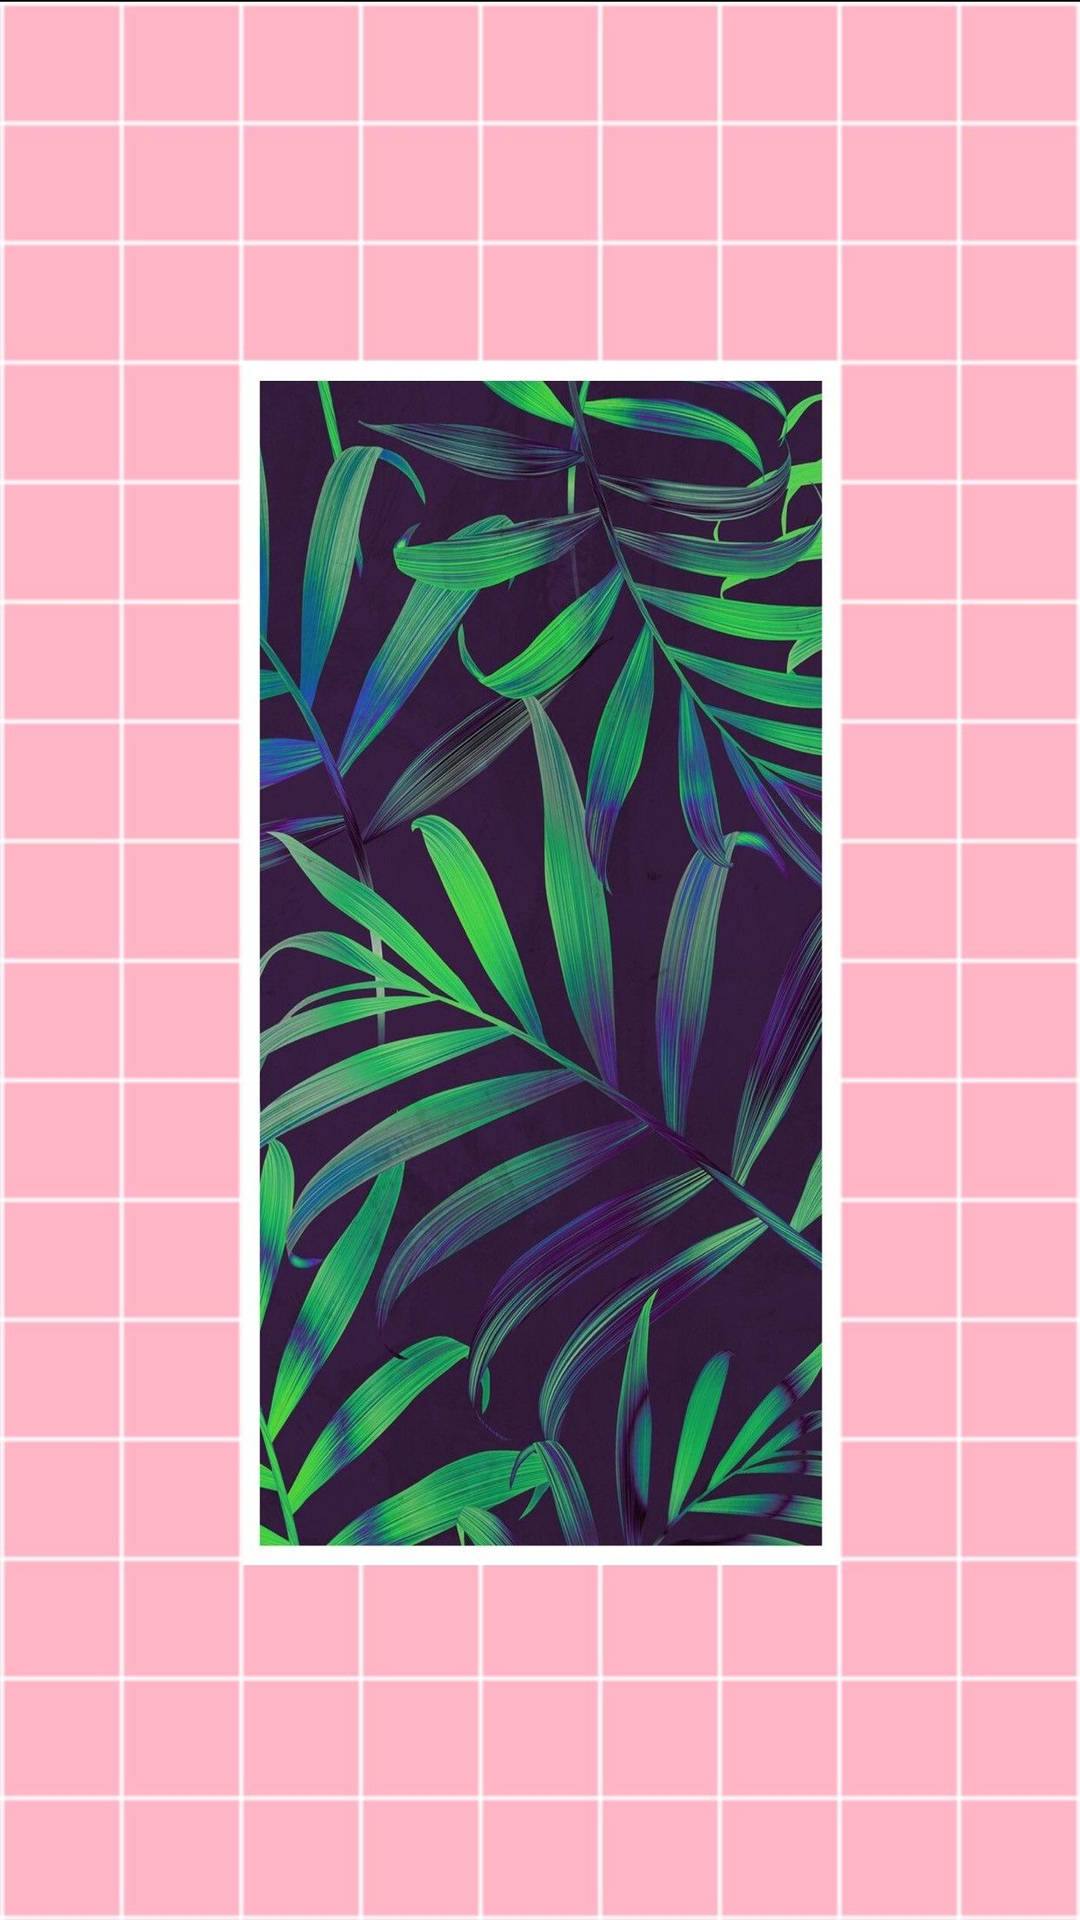 A tropical paradise awaits in this peaceful doorway, surrounded by vibrant pink palmera leaves. Wallpaper